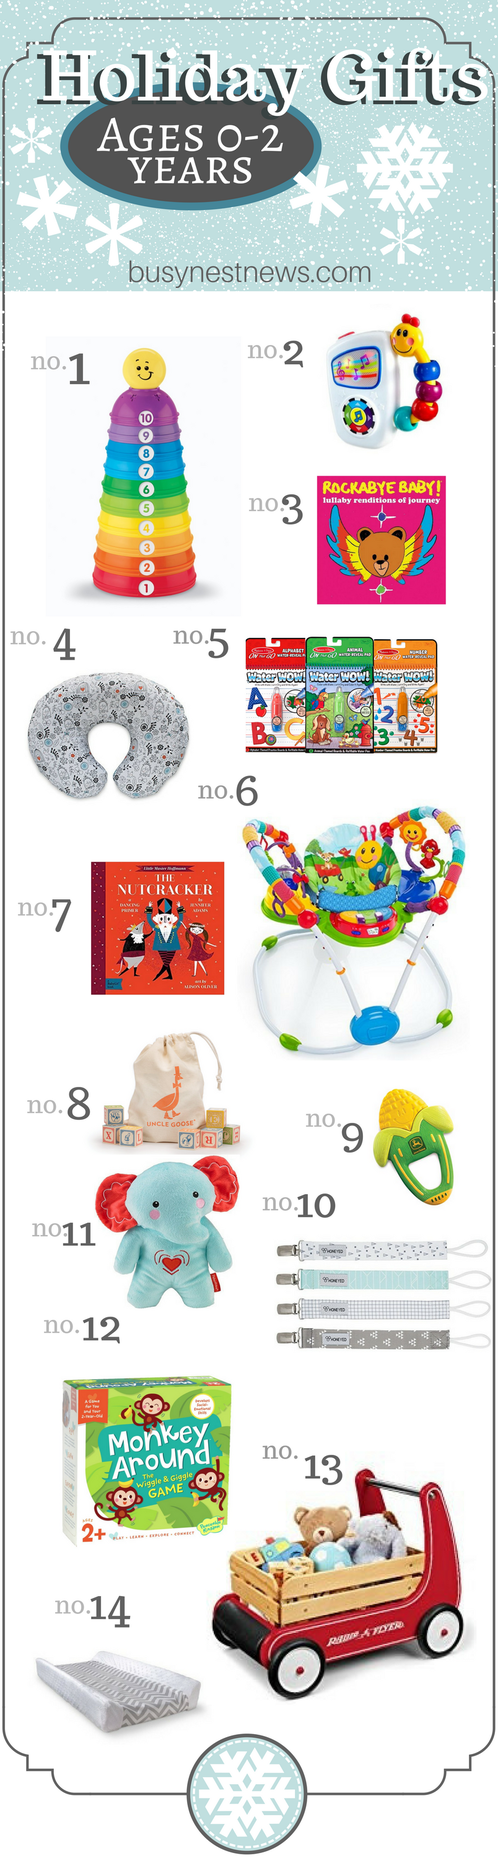 14 Gifts for kids 0-2 years at BusyNestNews.com